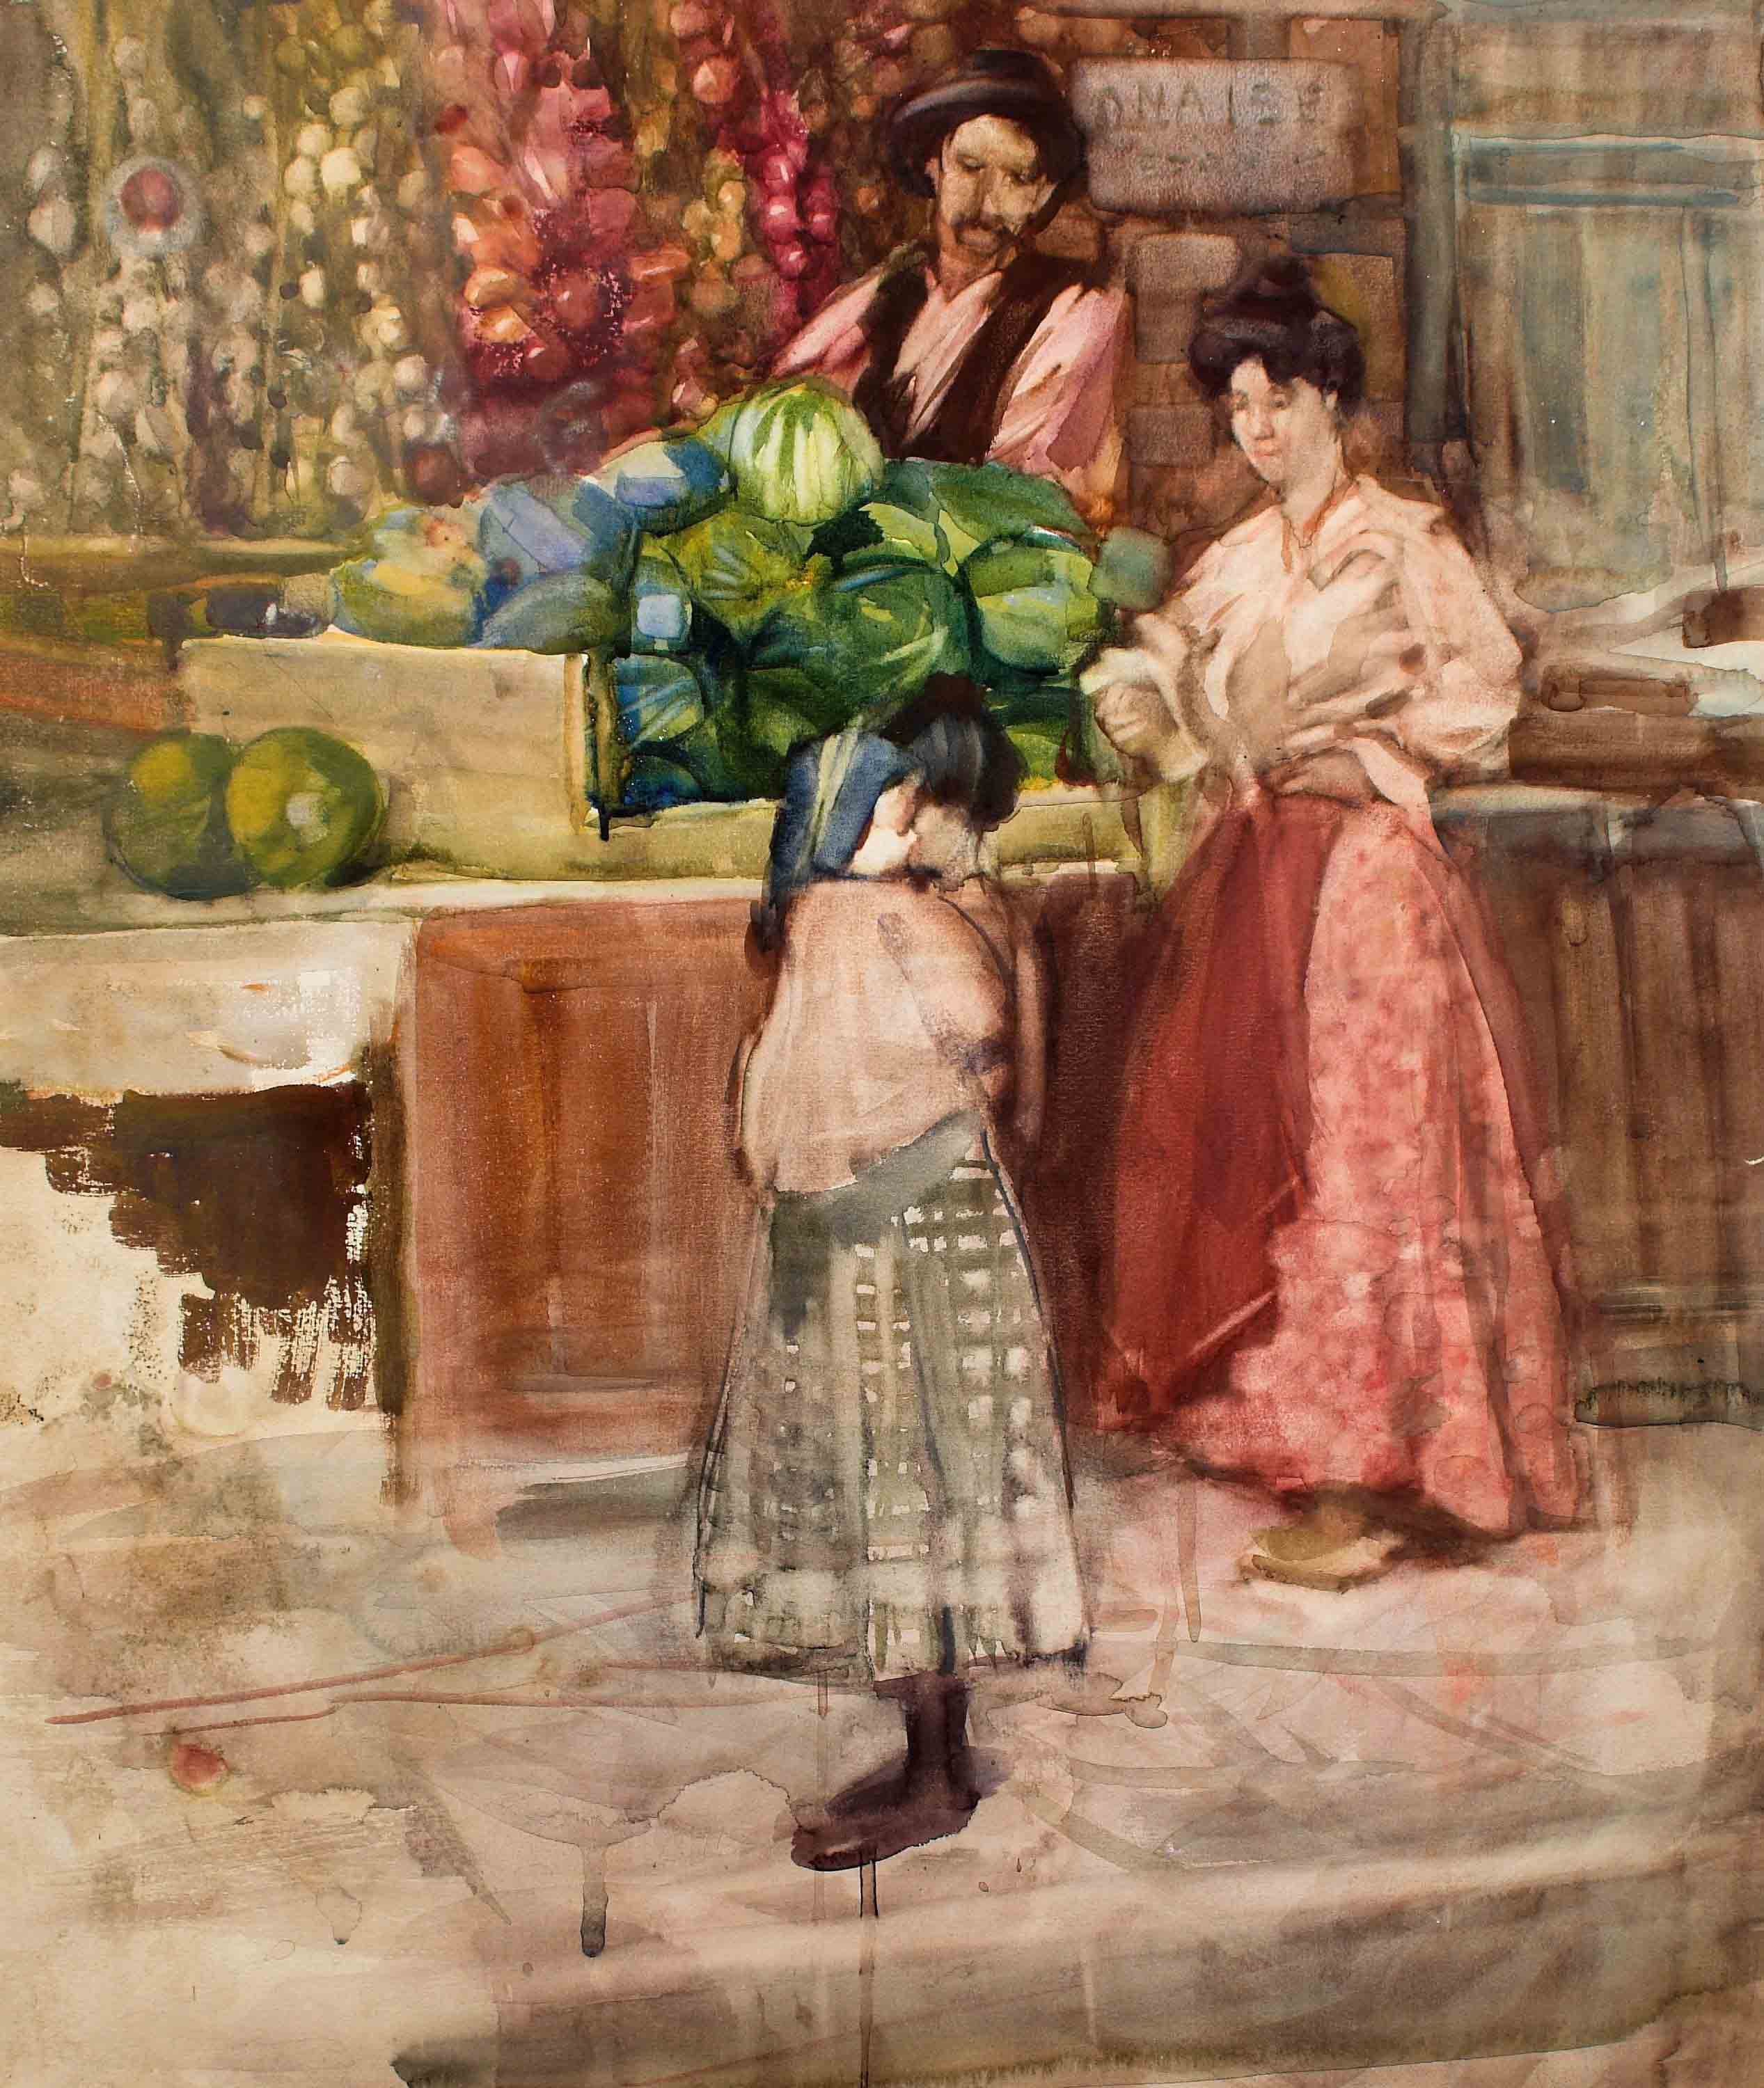 <p><strong>Frances Hodgkins</strong>,&nbsp;<em>Untitled [The Watermelon Seller]</em>, circa 1903, Auckland Art Gallery Toi o Tāmaki, purchased 2007</p>